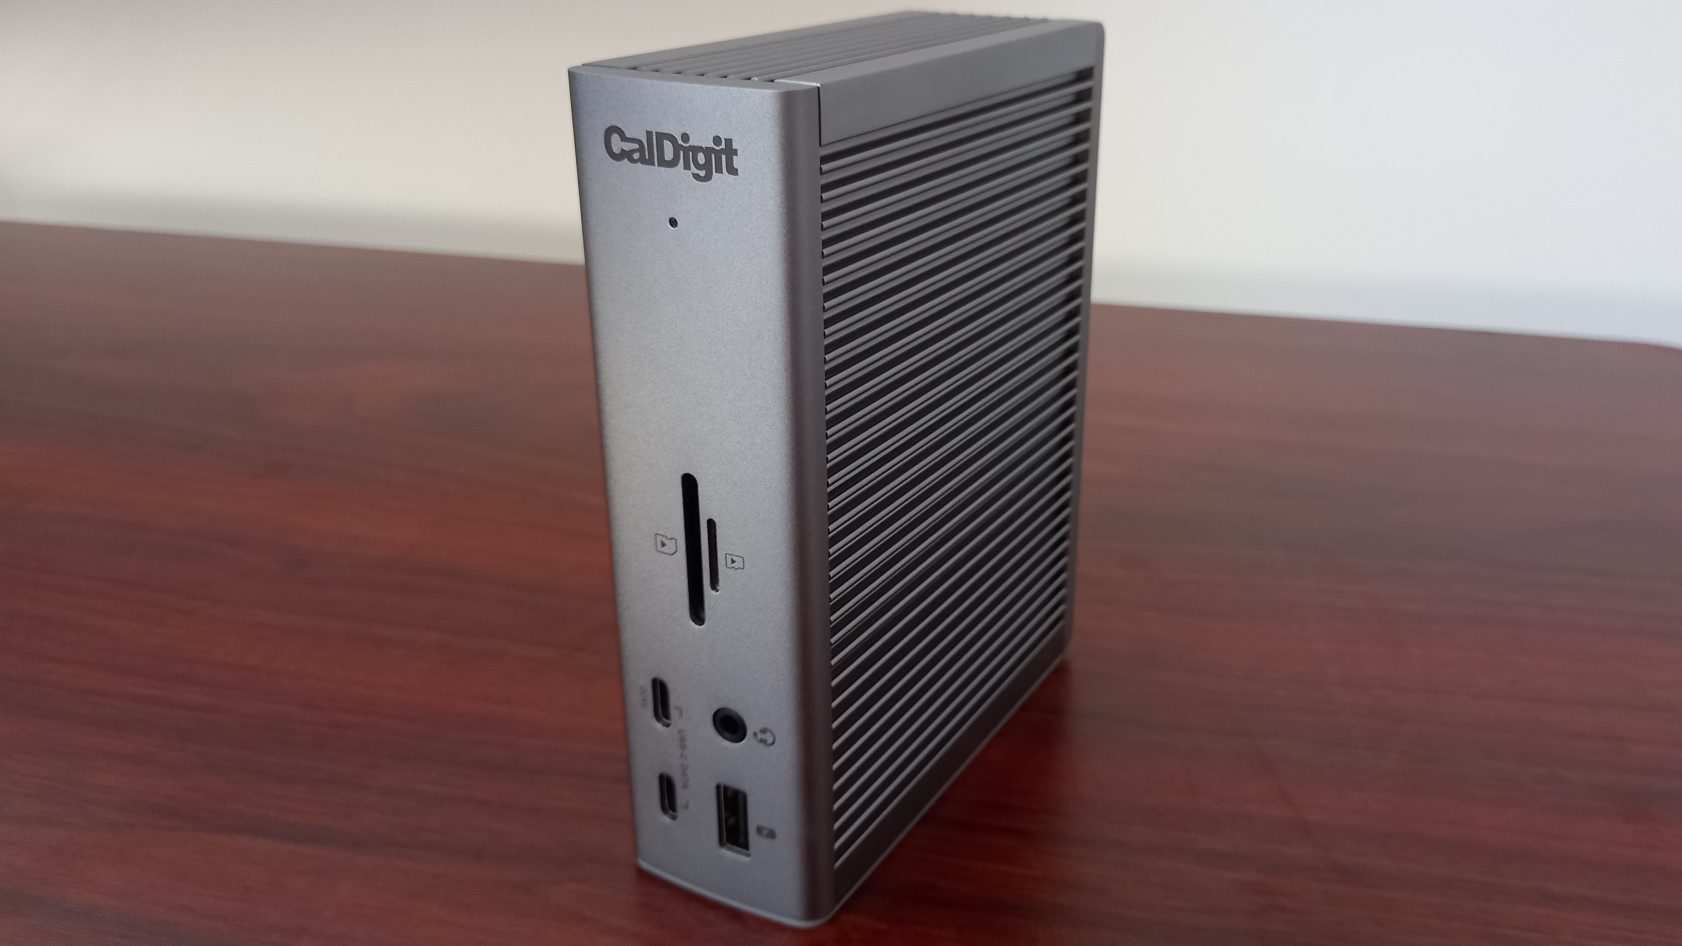 CalDigit TS4 review: The best Thunderbolt 4 dock comes at a high price